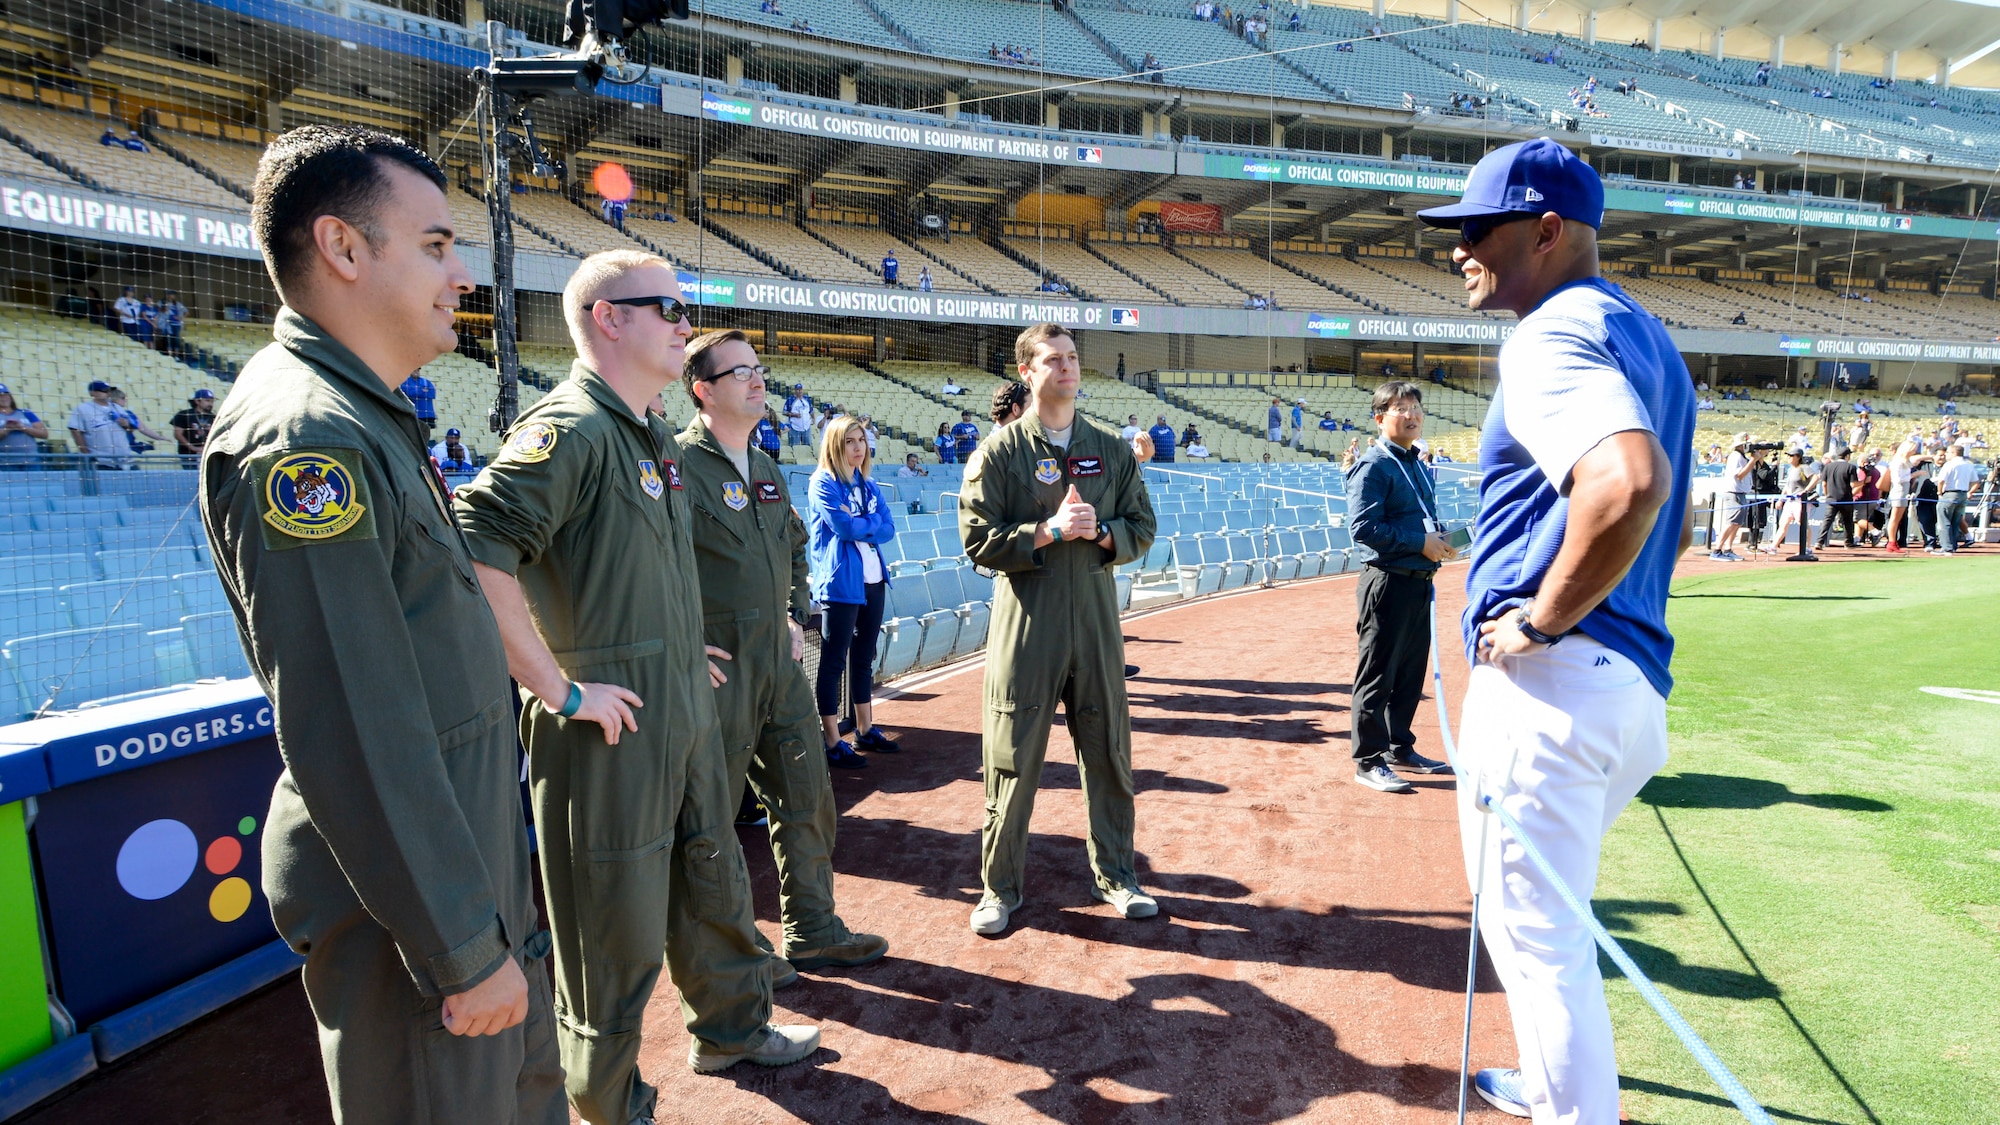 Tech. Sgt. Robert Villa, Master Sgt. Caleb Patterson, Maj. Duncan Reed and Maj. Dan Edelstein, all with 418th Flight Test Squadron, 412th Test Wing, talks with Los Angeles Dodgers first base coach George Lombard prior to Game 3 of Major League Baseball’s National League Championship Series between the Los Angeles Dodgers and Milwaukee Brewers at Dodger Stadium in Los Angeles, California, Oct. 15. (U.S. Air Force photo by Giancarlo Casem)